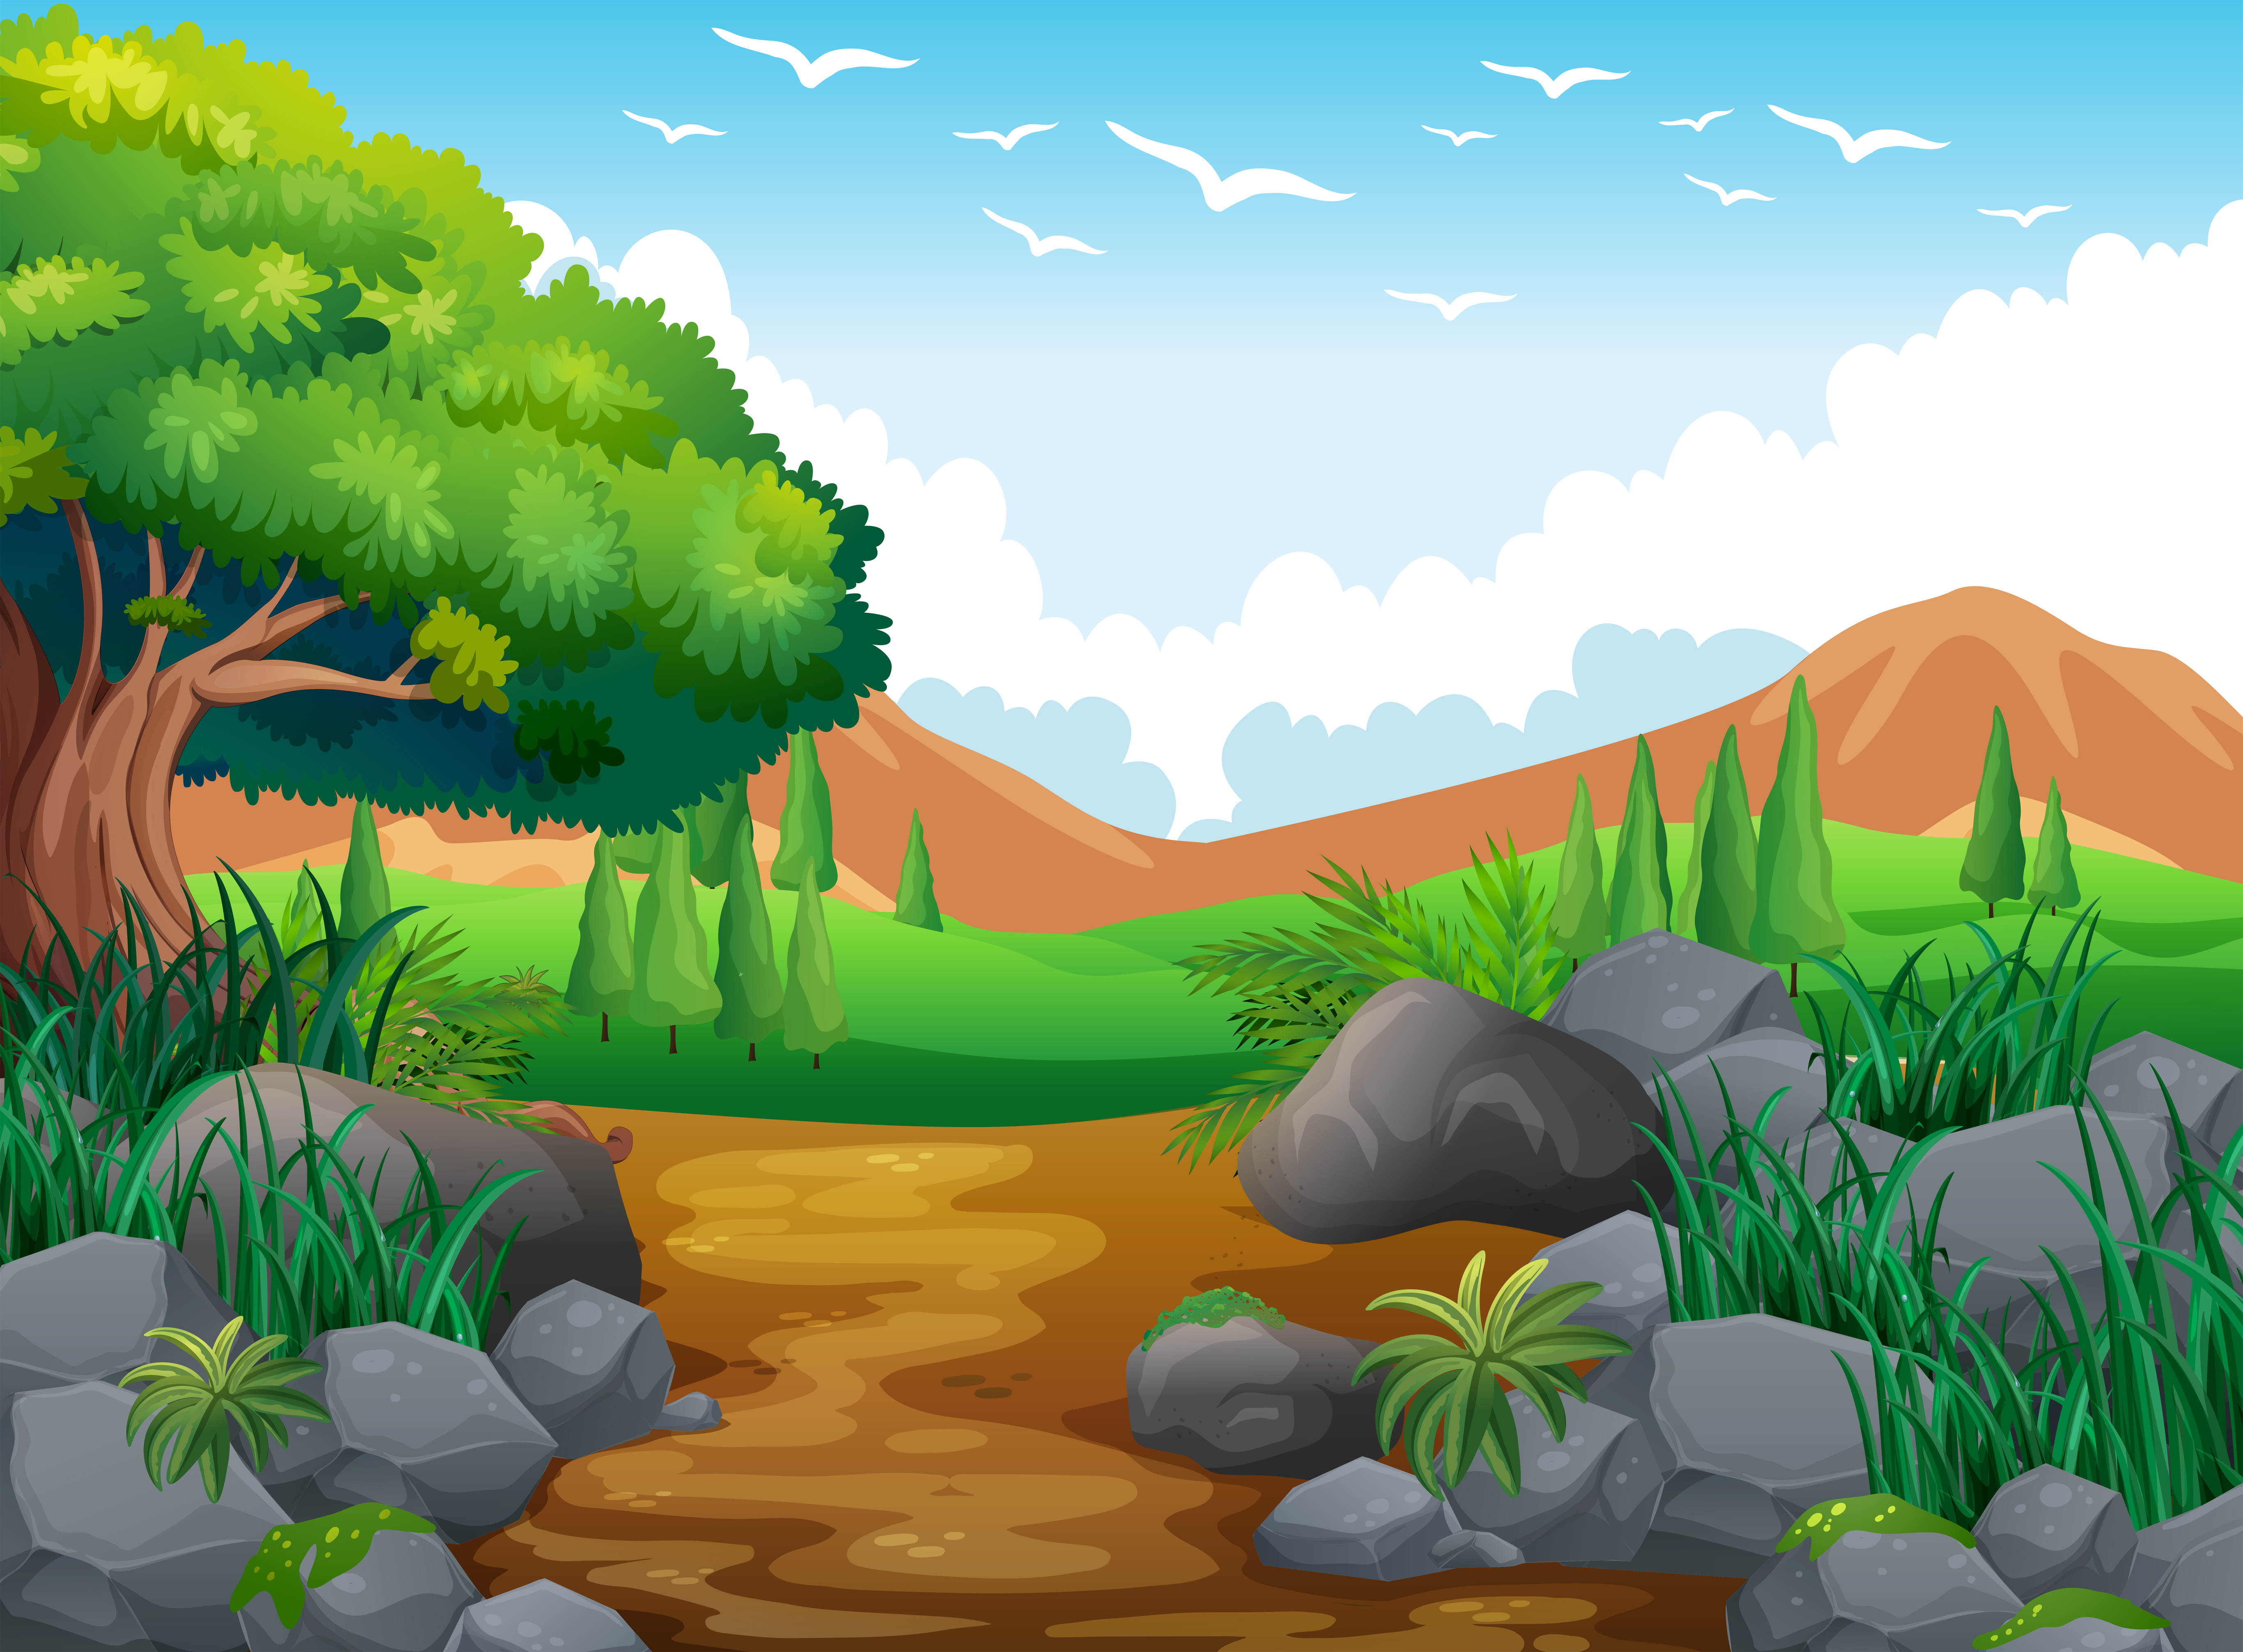  Nature  scene with hills and trail Download Free Vectors 